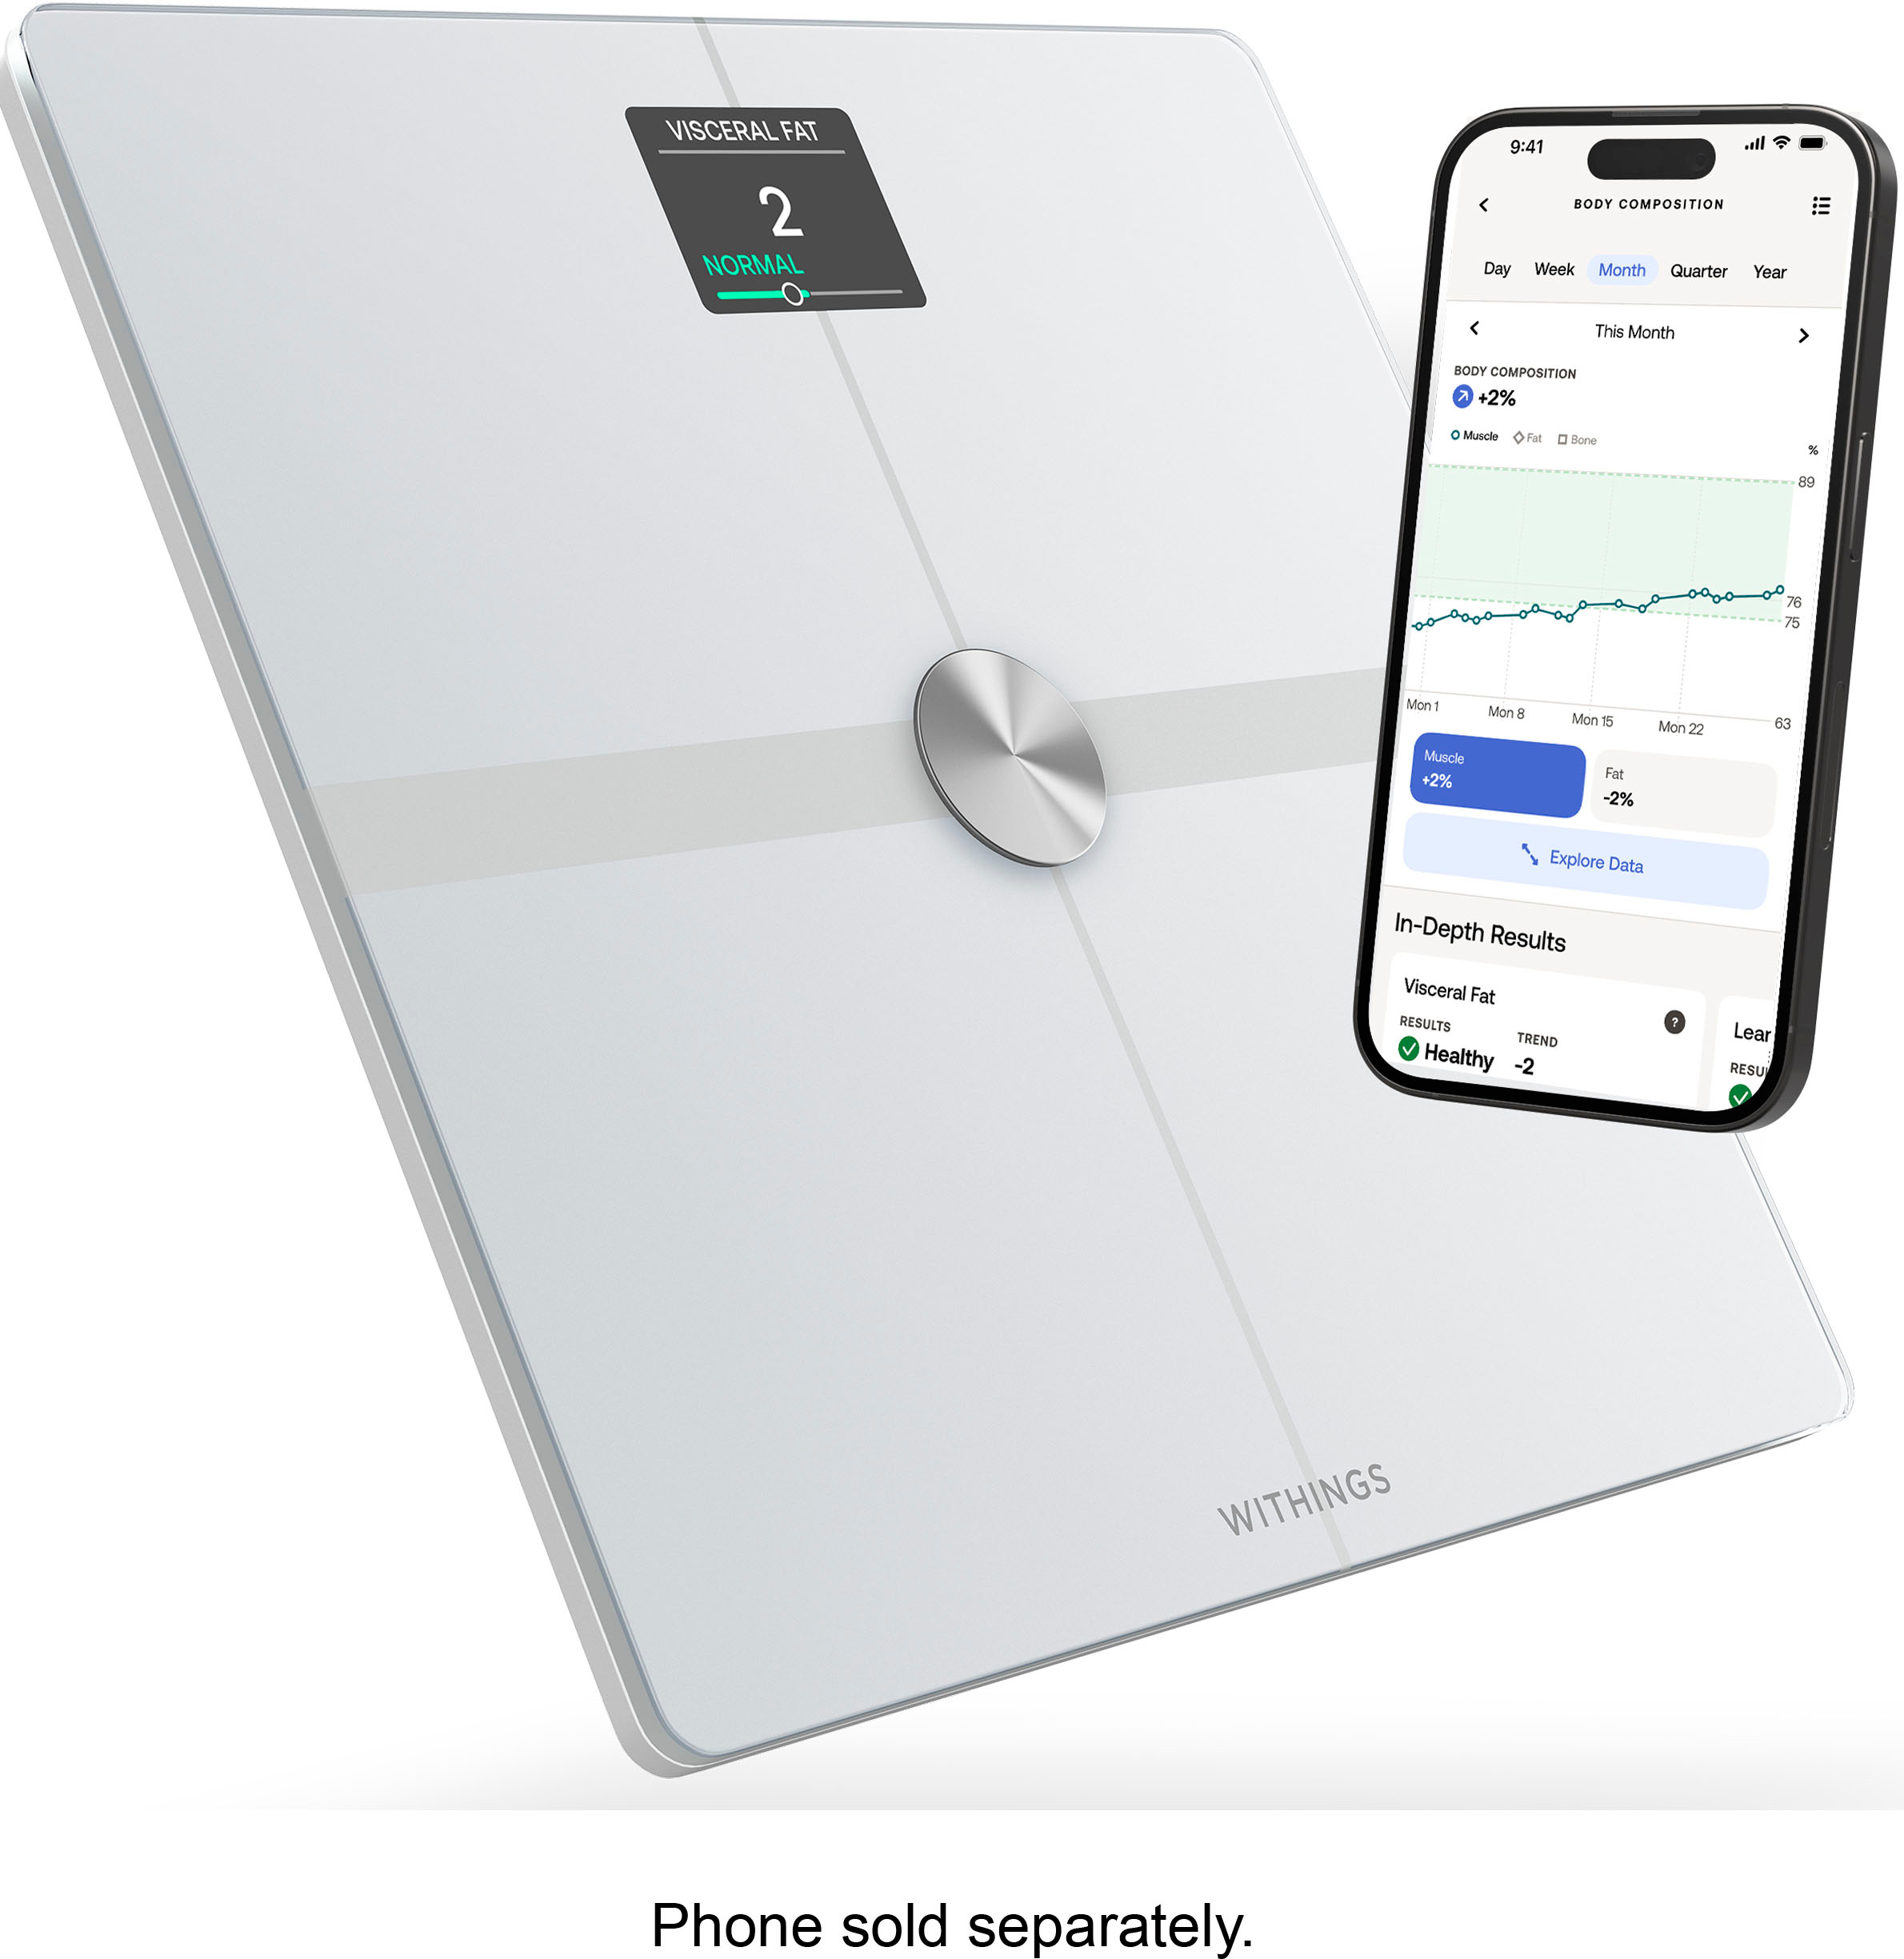 Withings Body Cardio – Premium Wi-Fi Body Composition Smart Scale